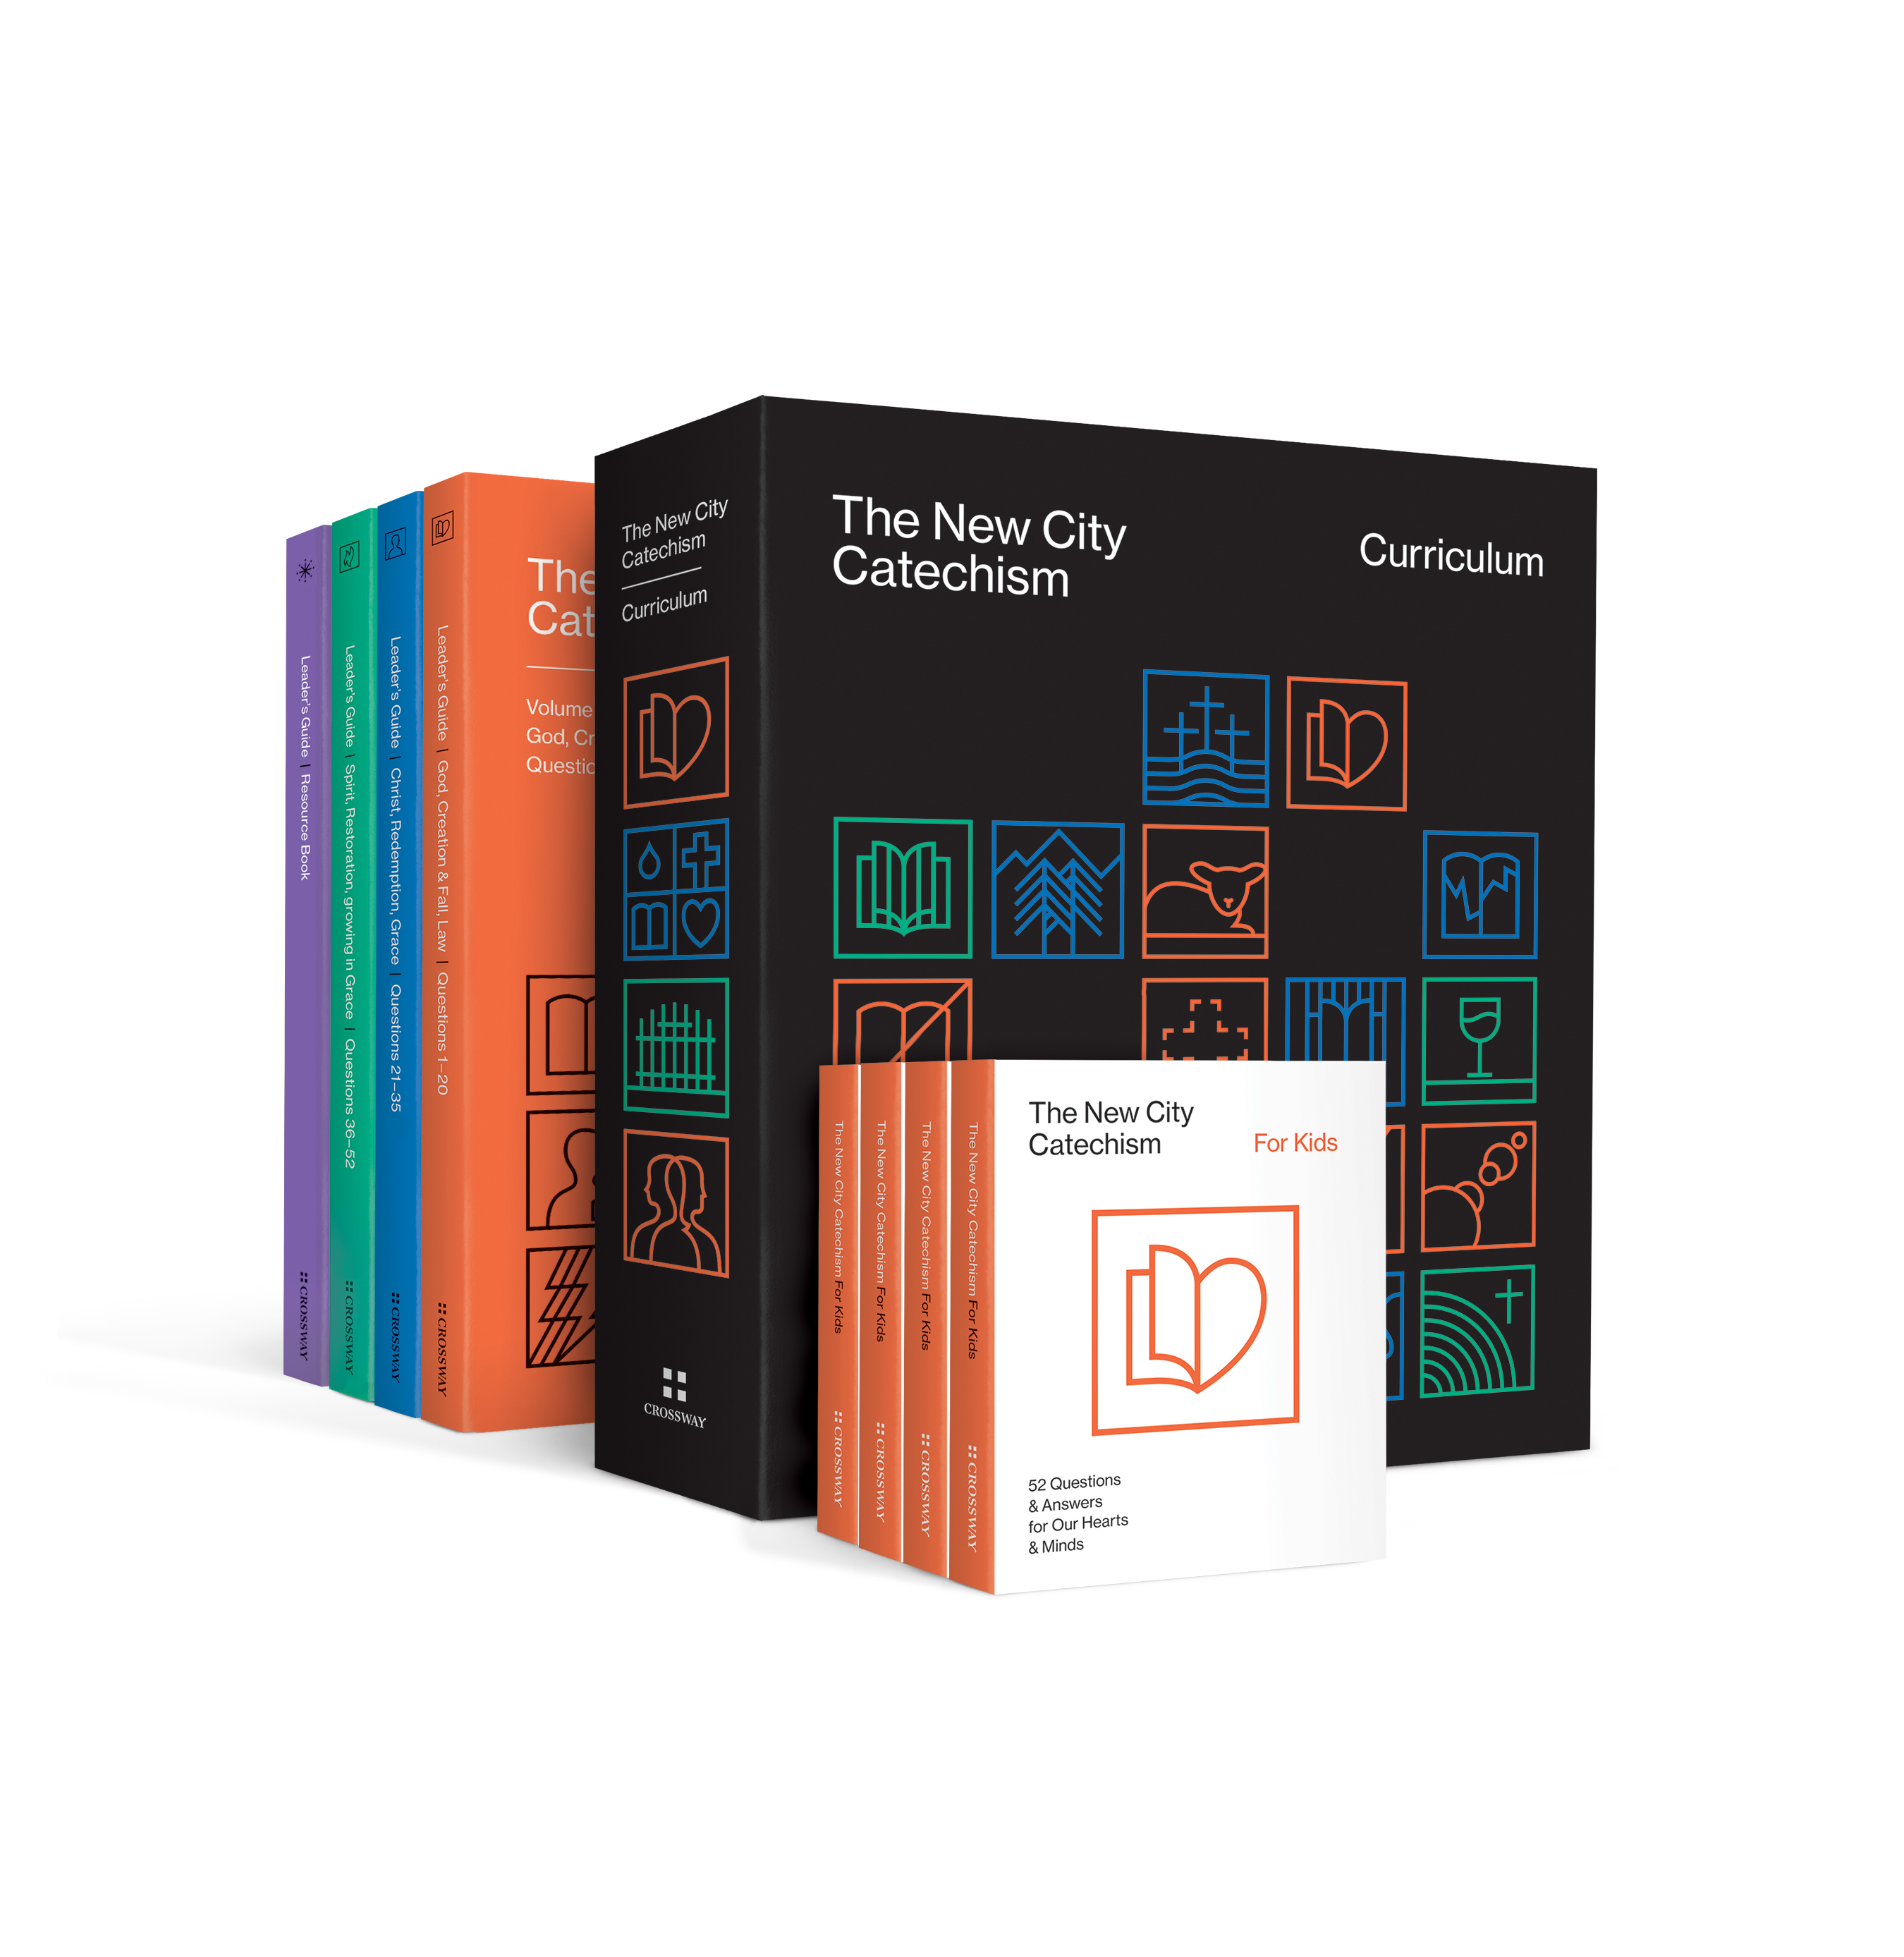 The New City Catechism Curriculum (Kit) | Free Delivery @ Eden.co.uk2700 x 2775